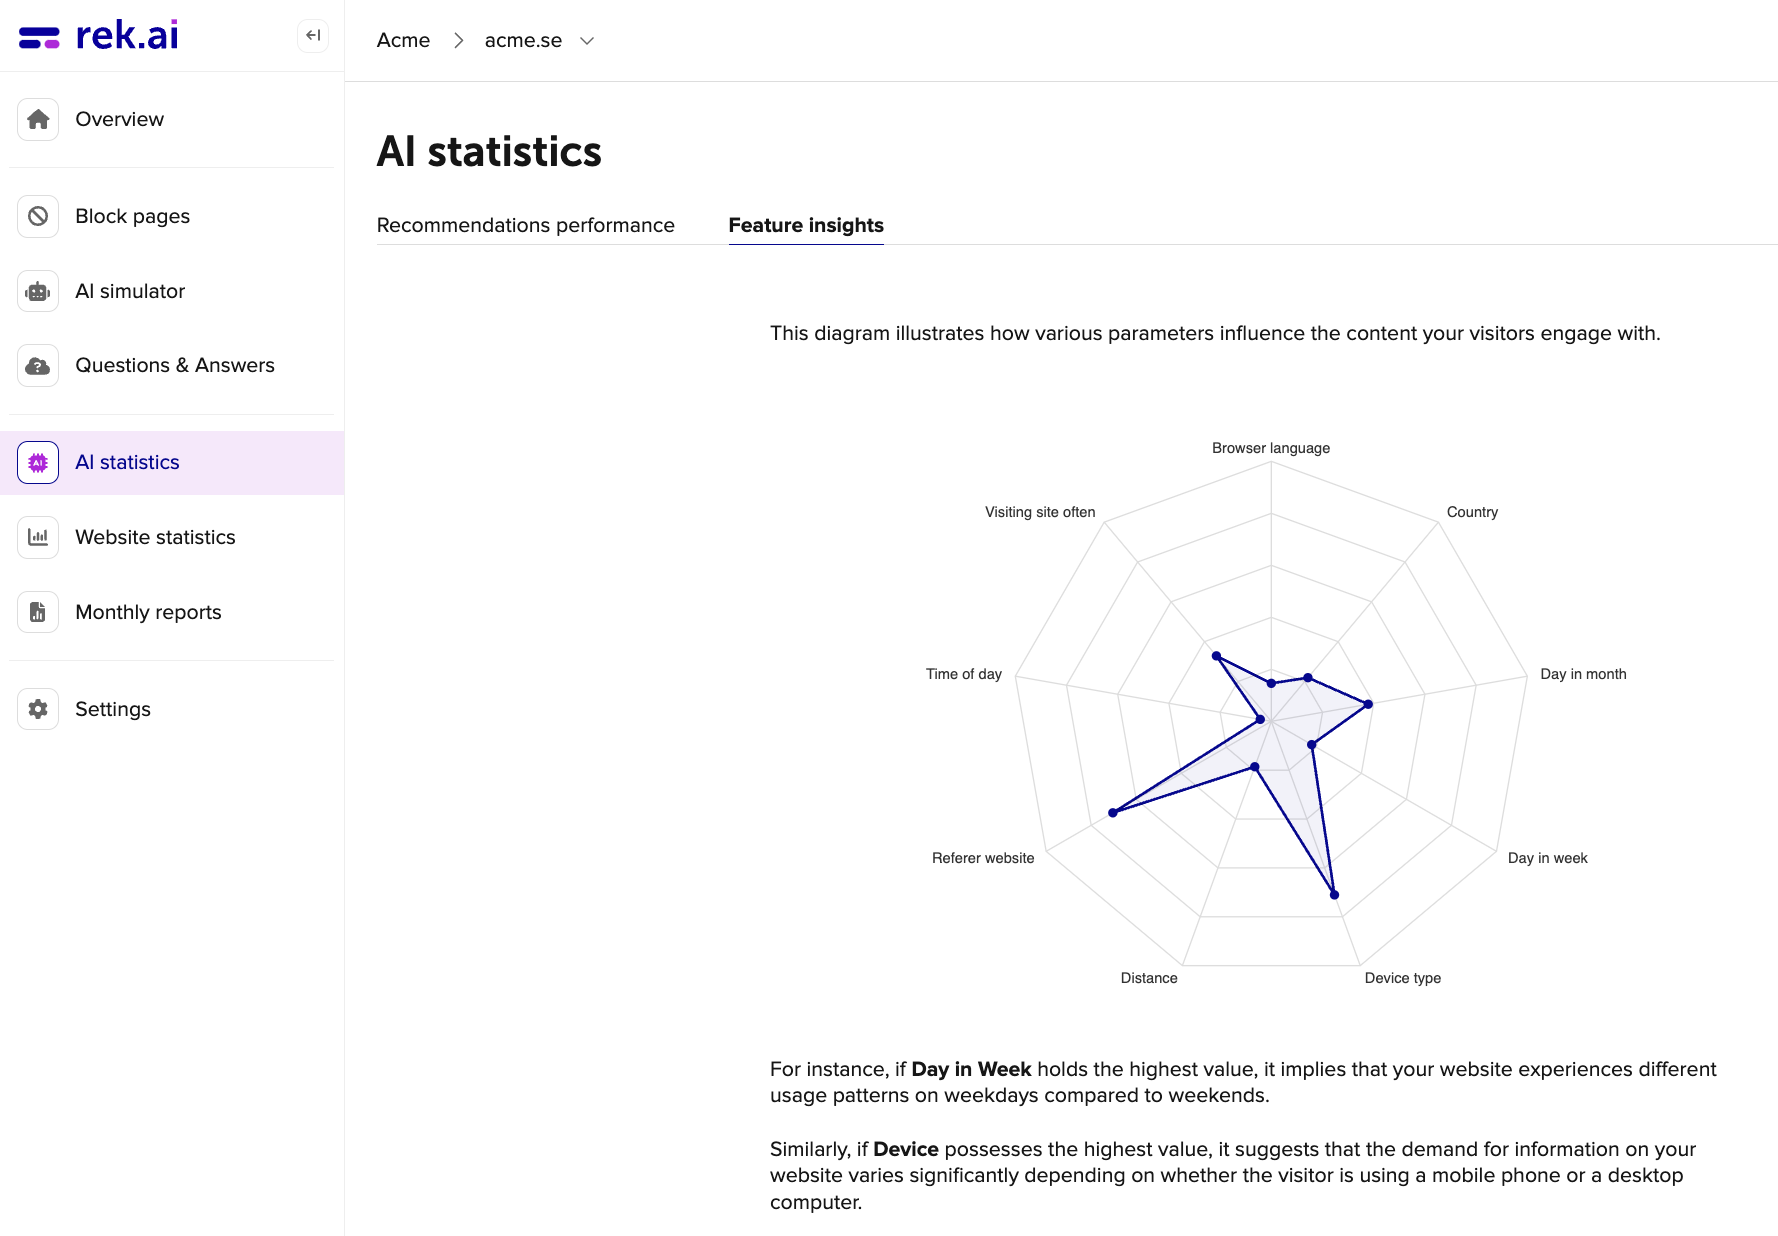 image of ai statistics feature insights tab in rek.ai dashboard